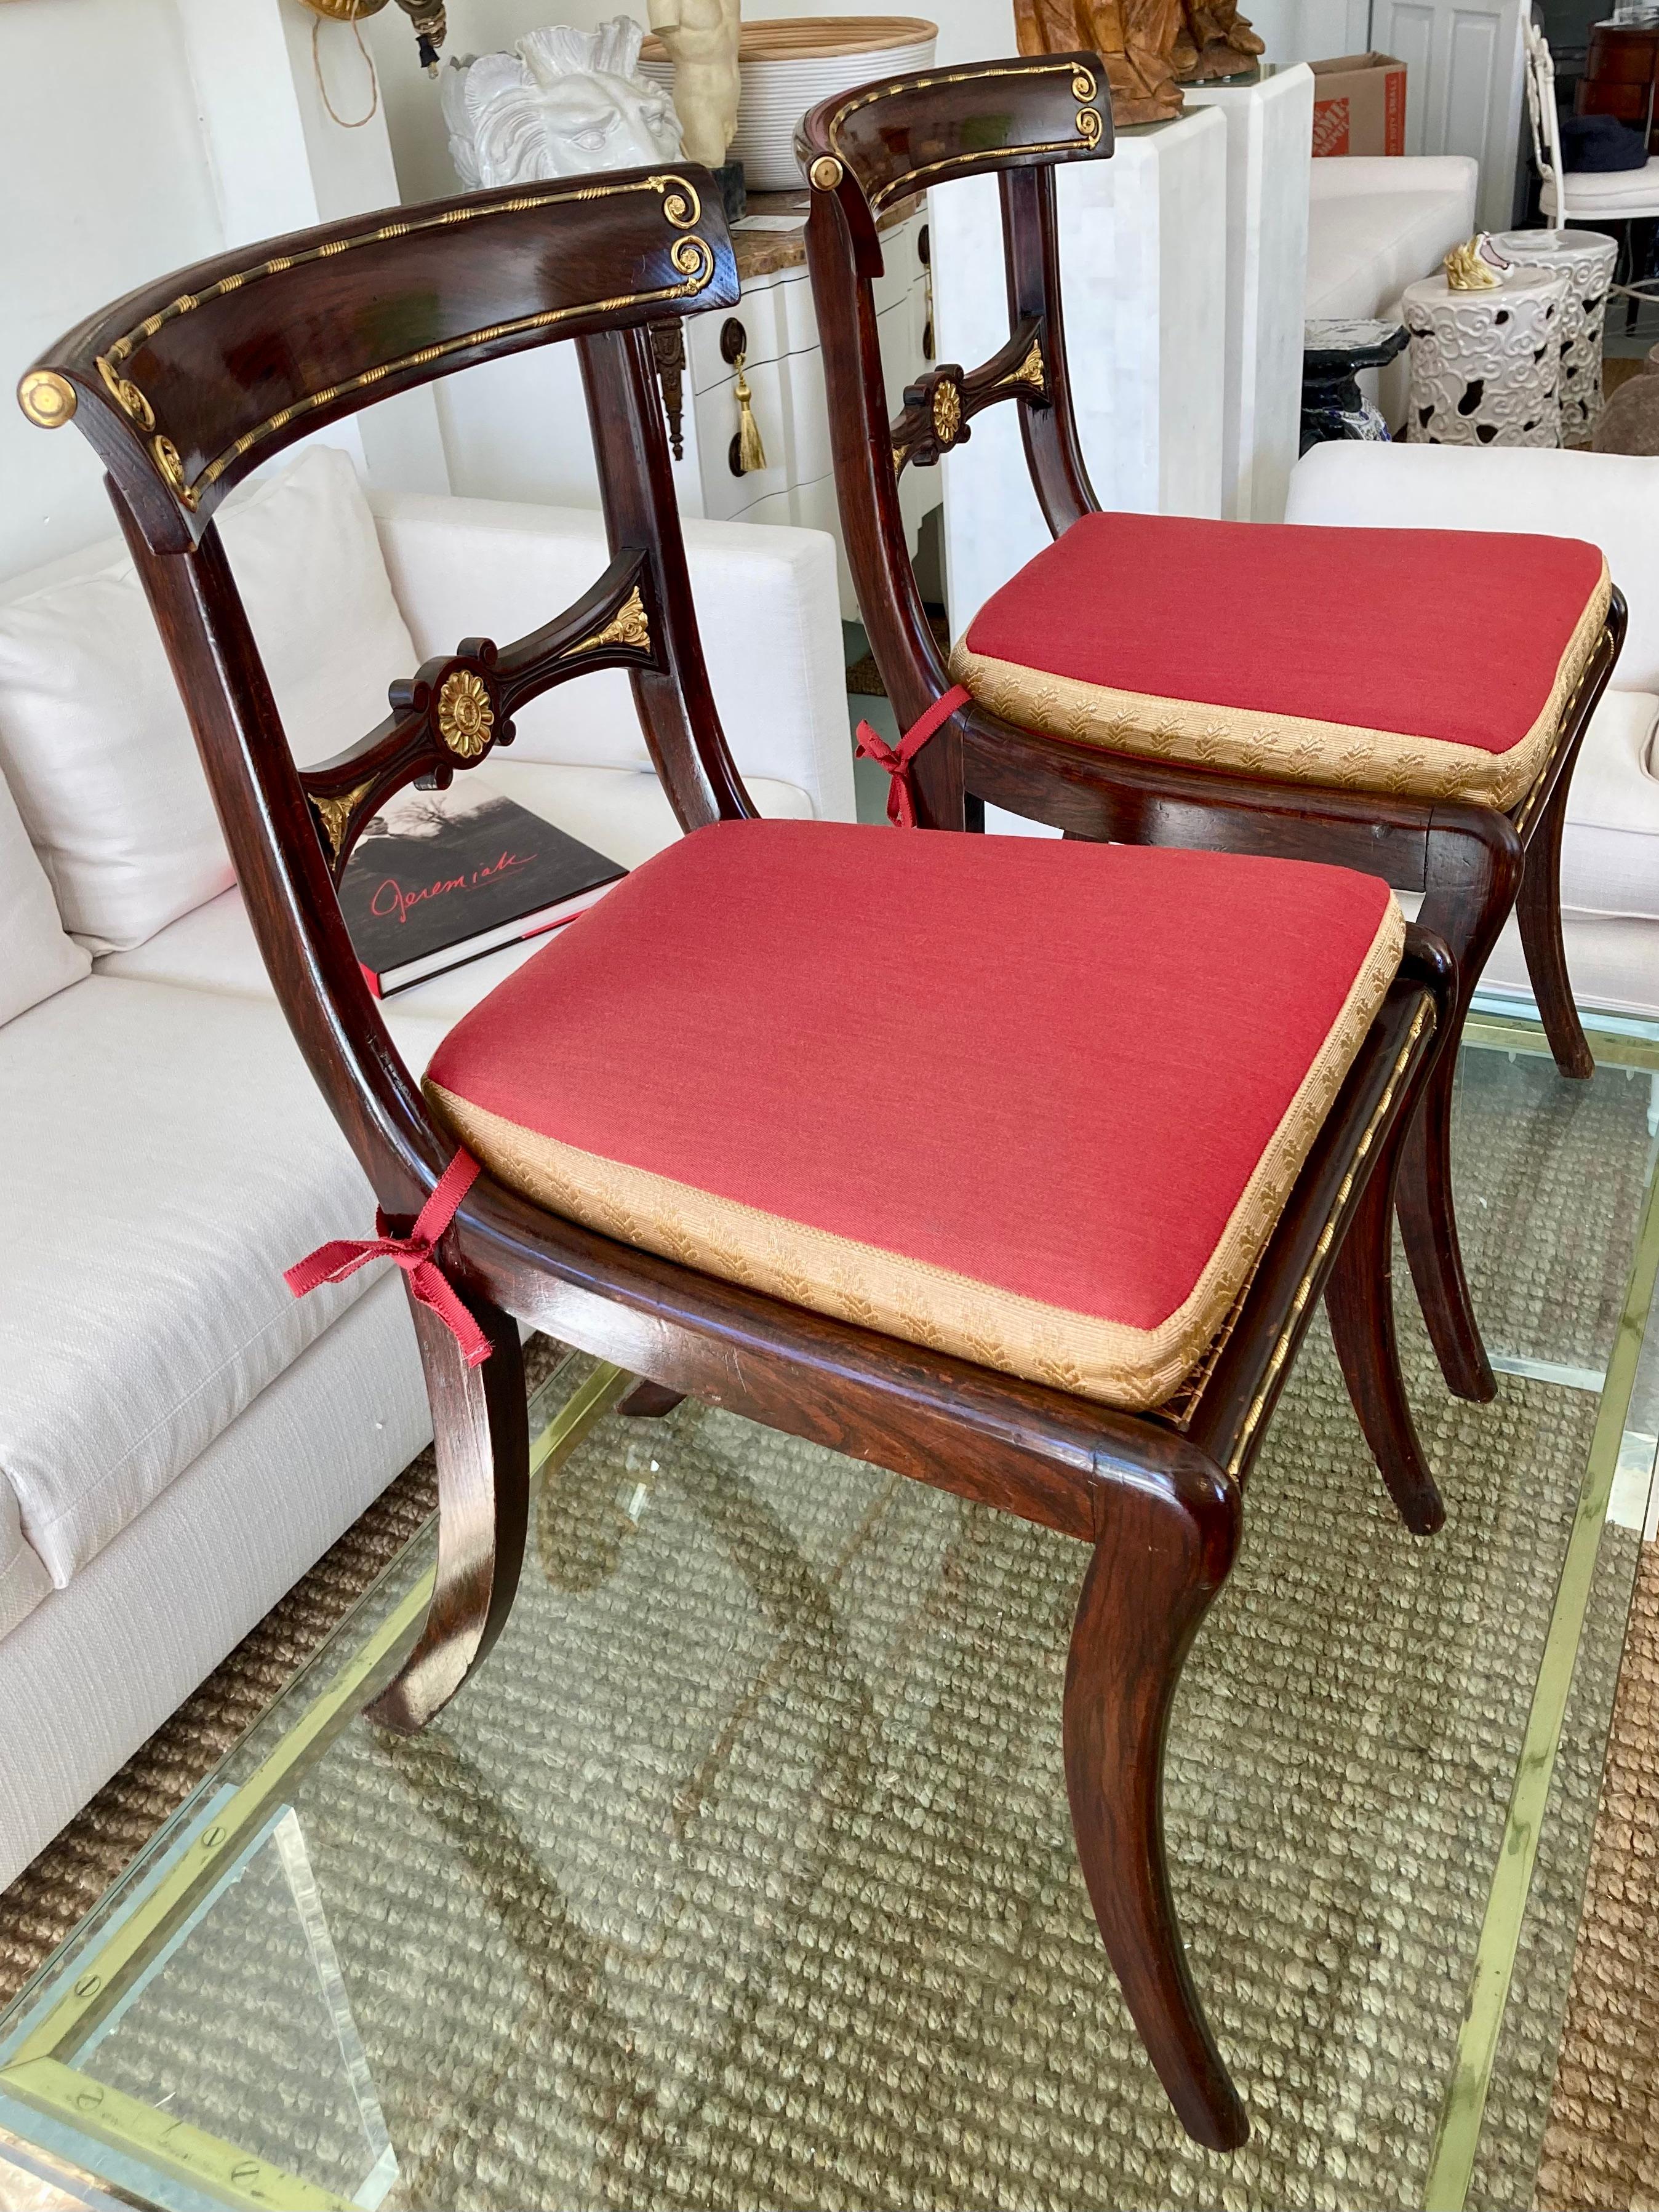 19th C Ormolu Inset Regency Chairs With Red Cushions and Gold Metal, Set of 8 In Good Condition For Sale In Los Angeles, CA